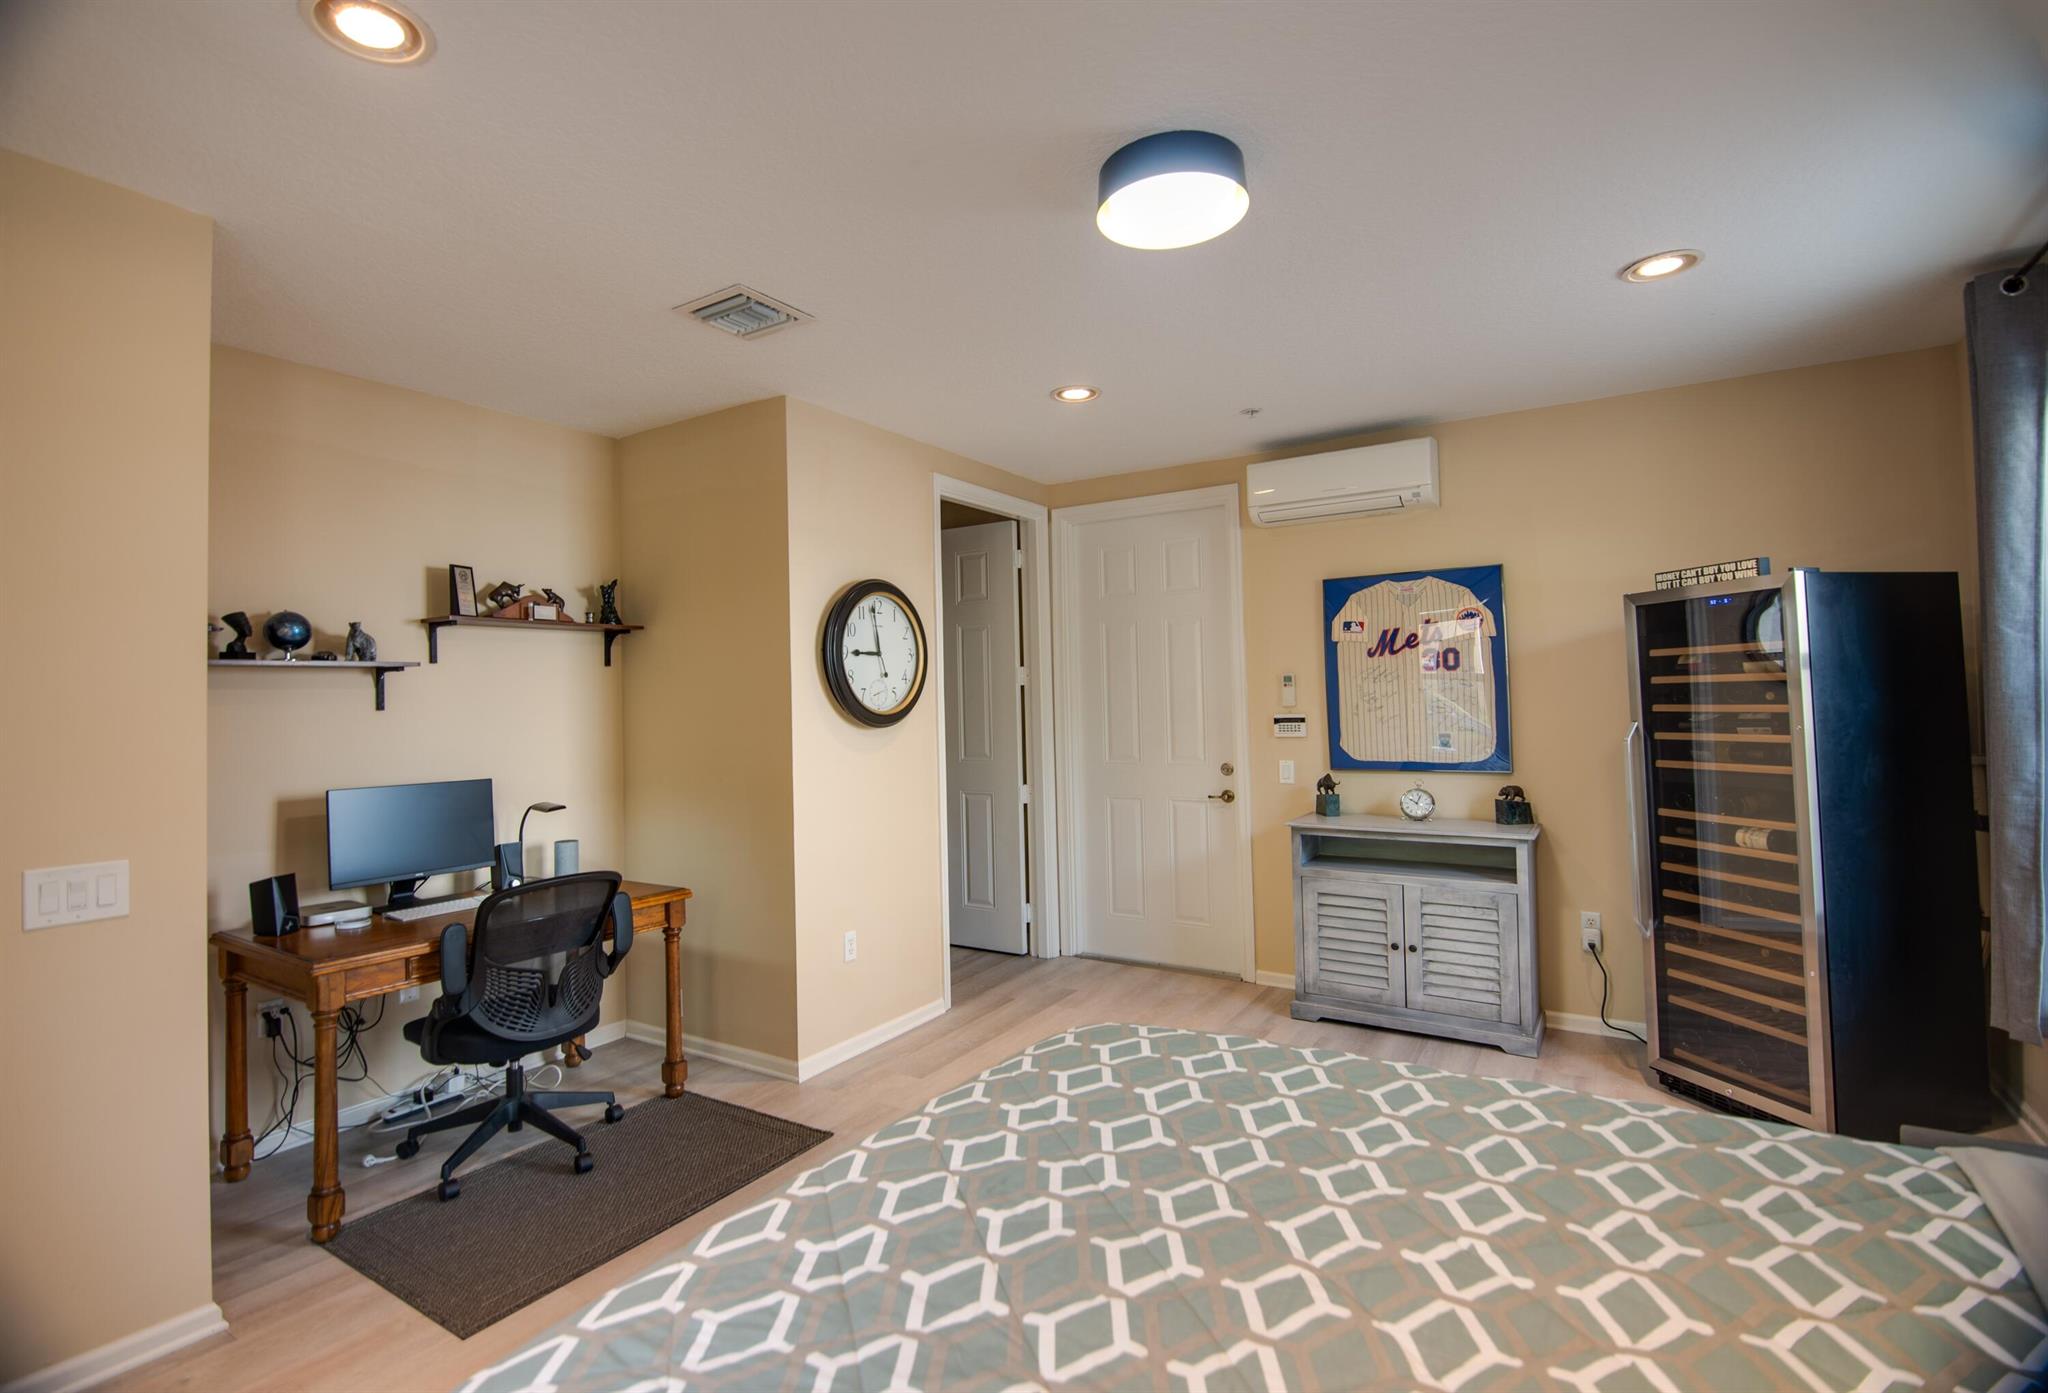 Photo 9 of 28 of 1333 Piazza Delle Pallottole townhome